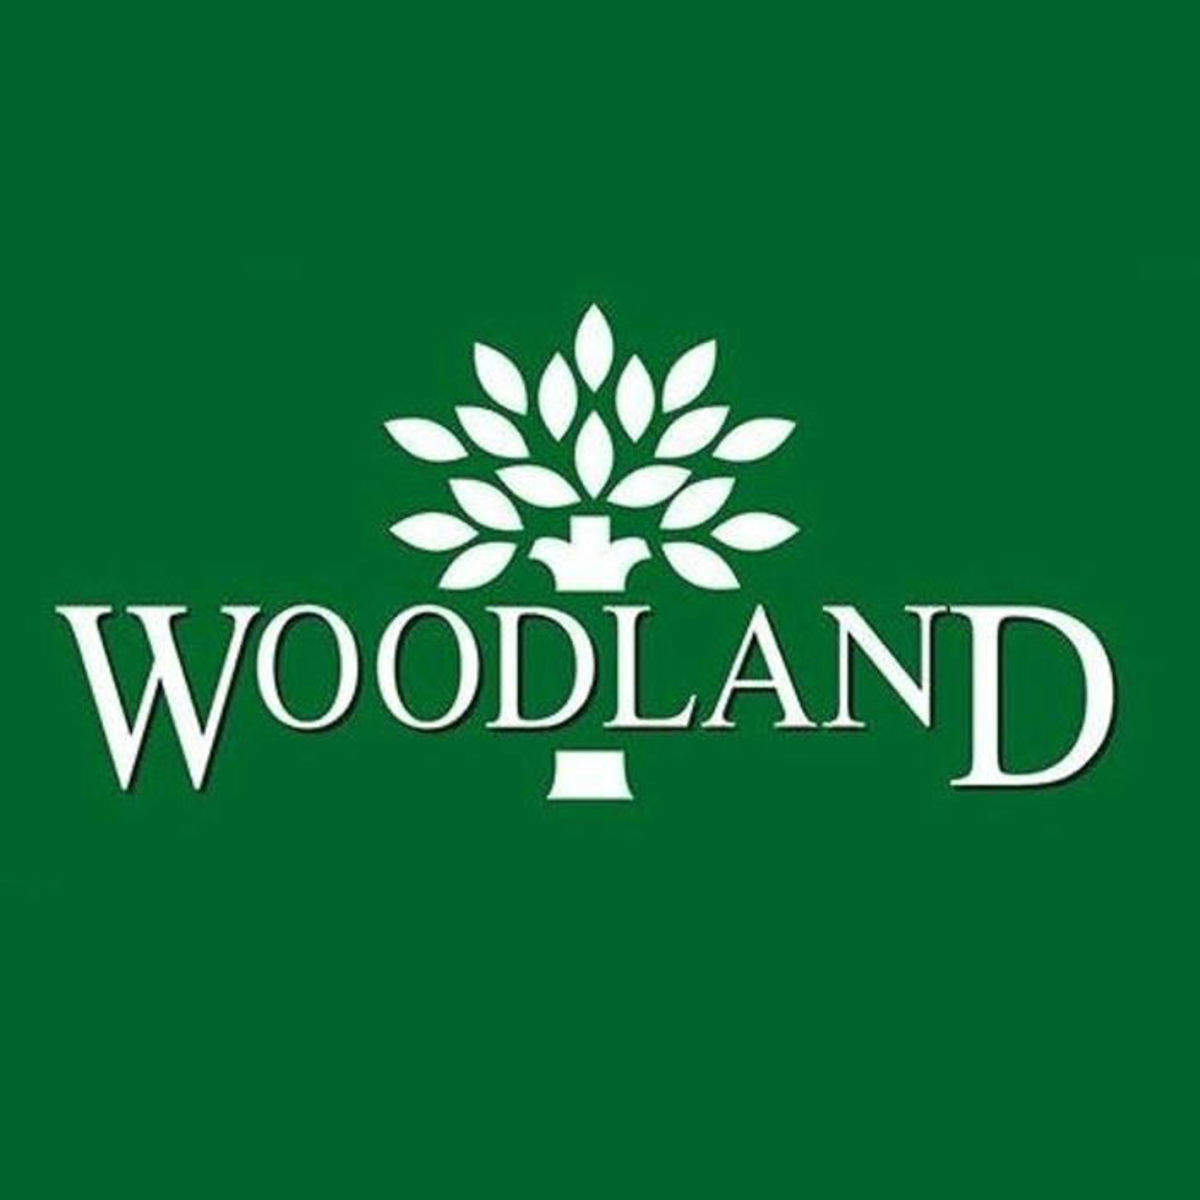 Woodland to add up to 120 exclusive 